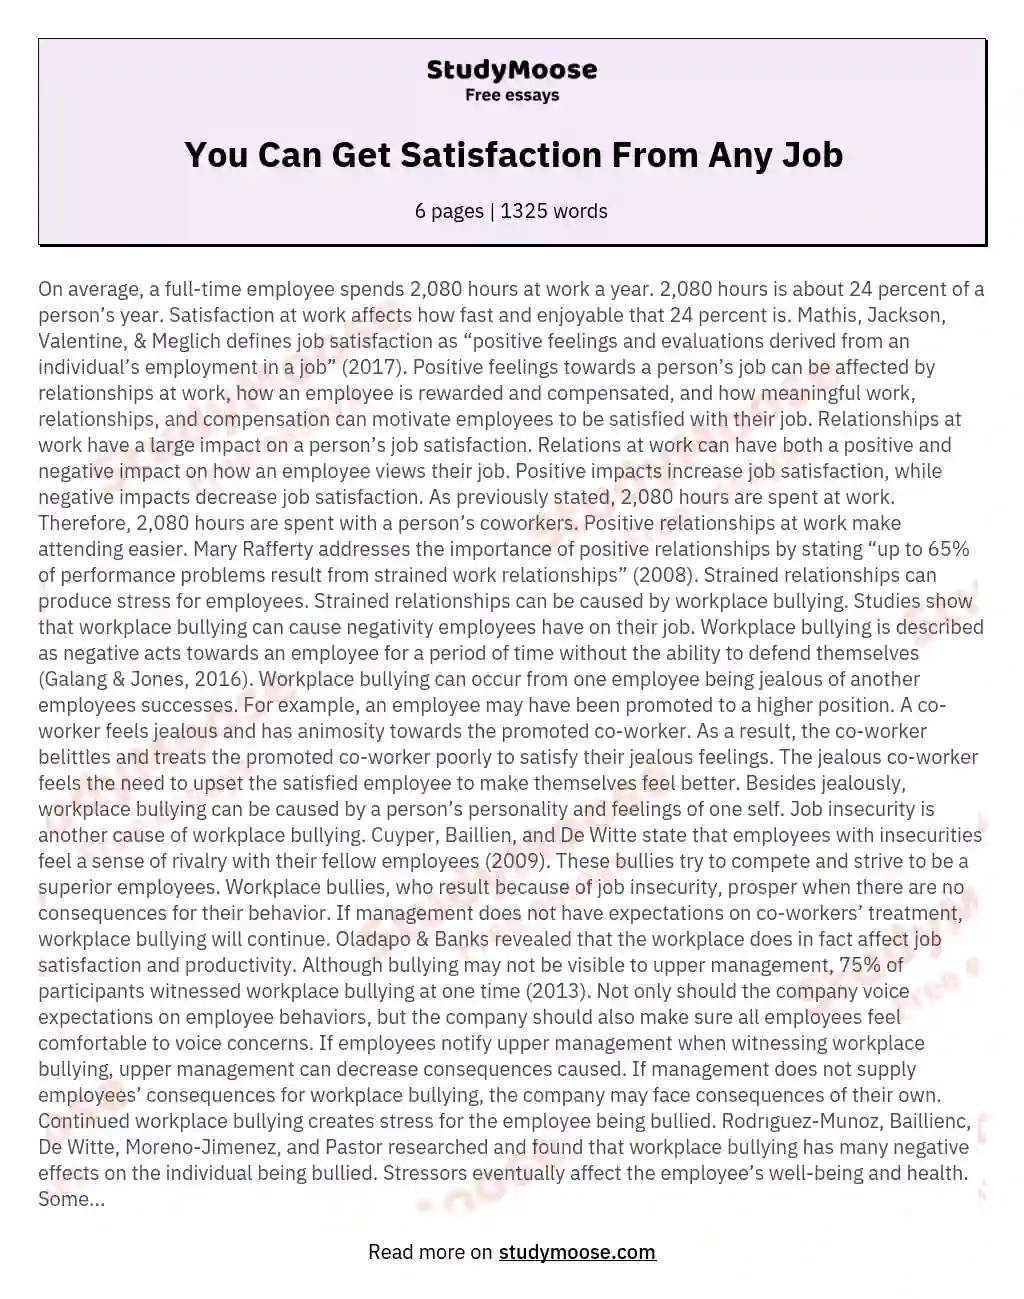 You Can Get Satisfaction From Any Job essay